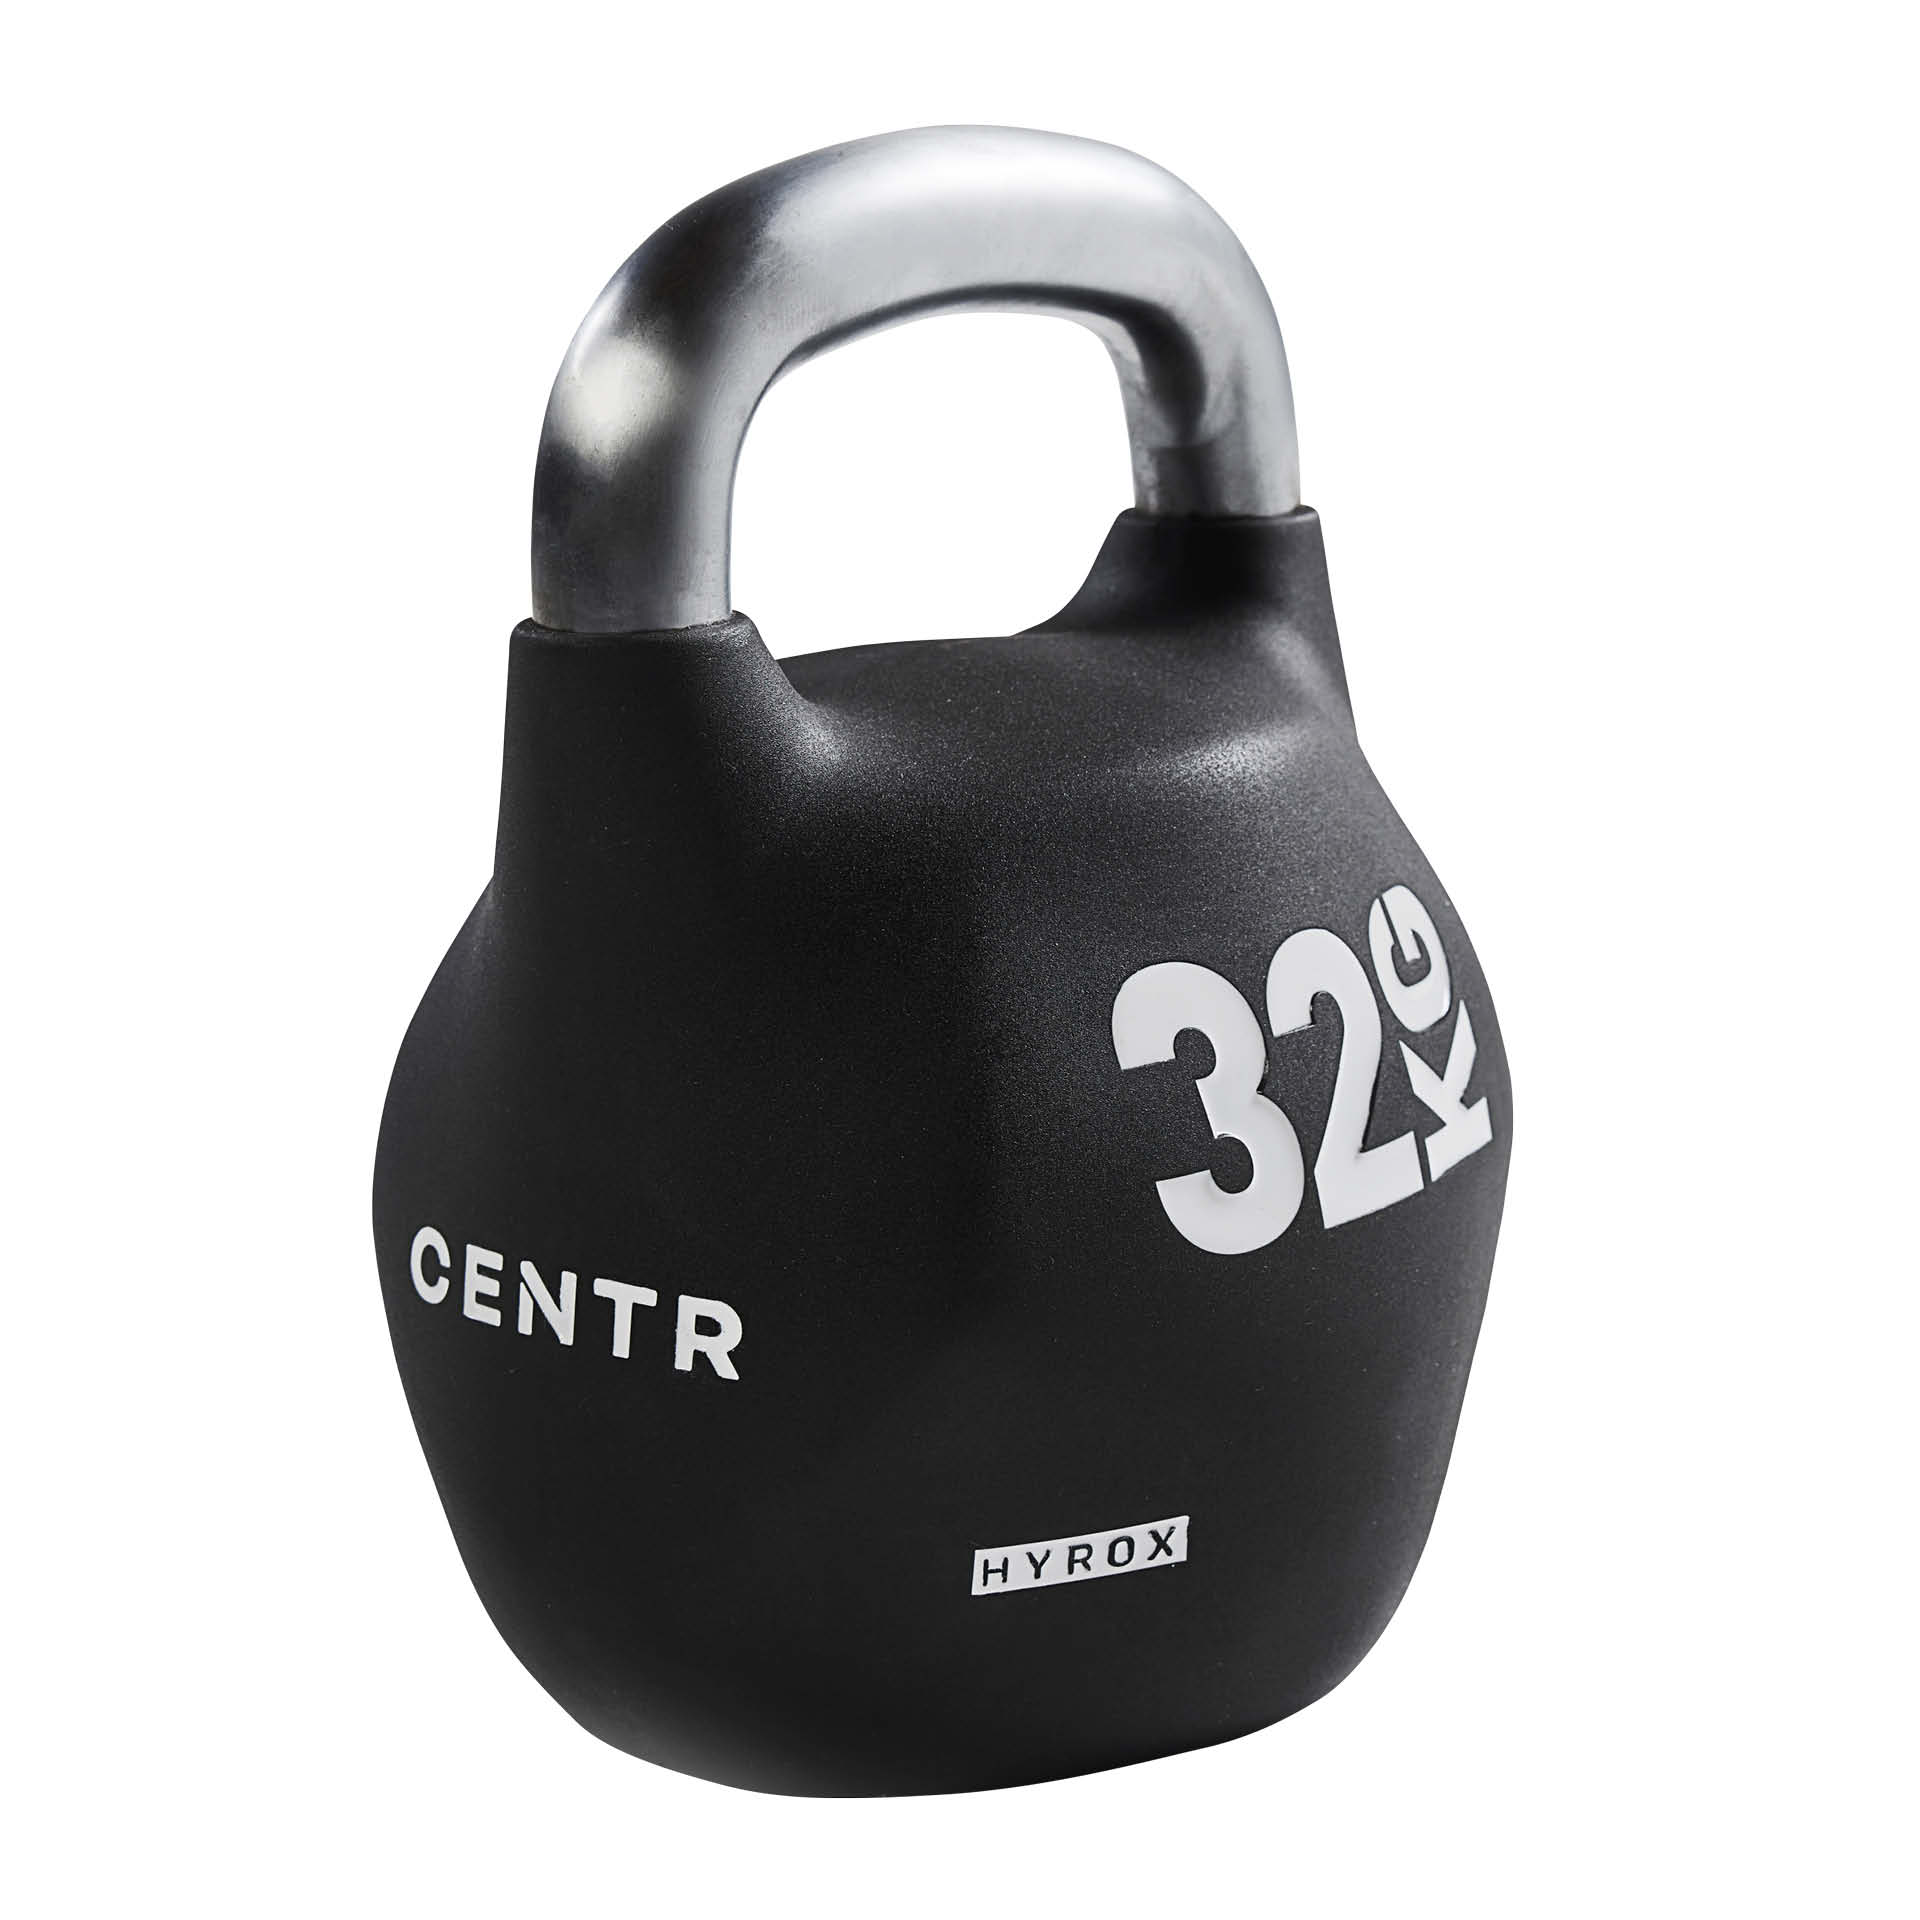 CENTR x HYROX Competition Octo Kettlebell 32 kg